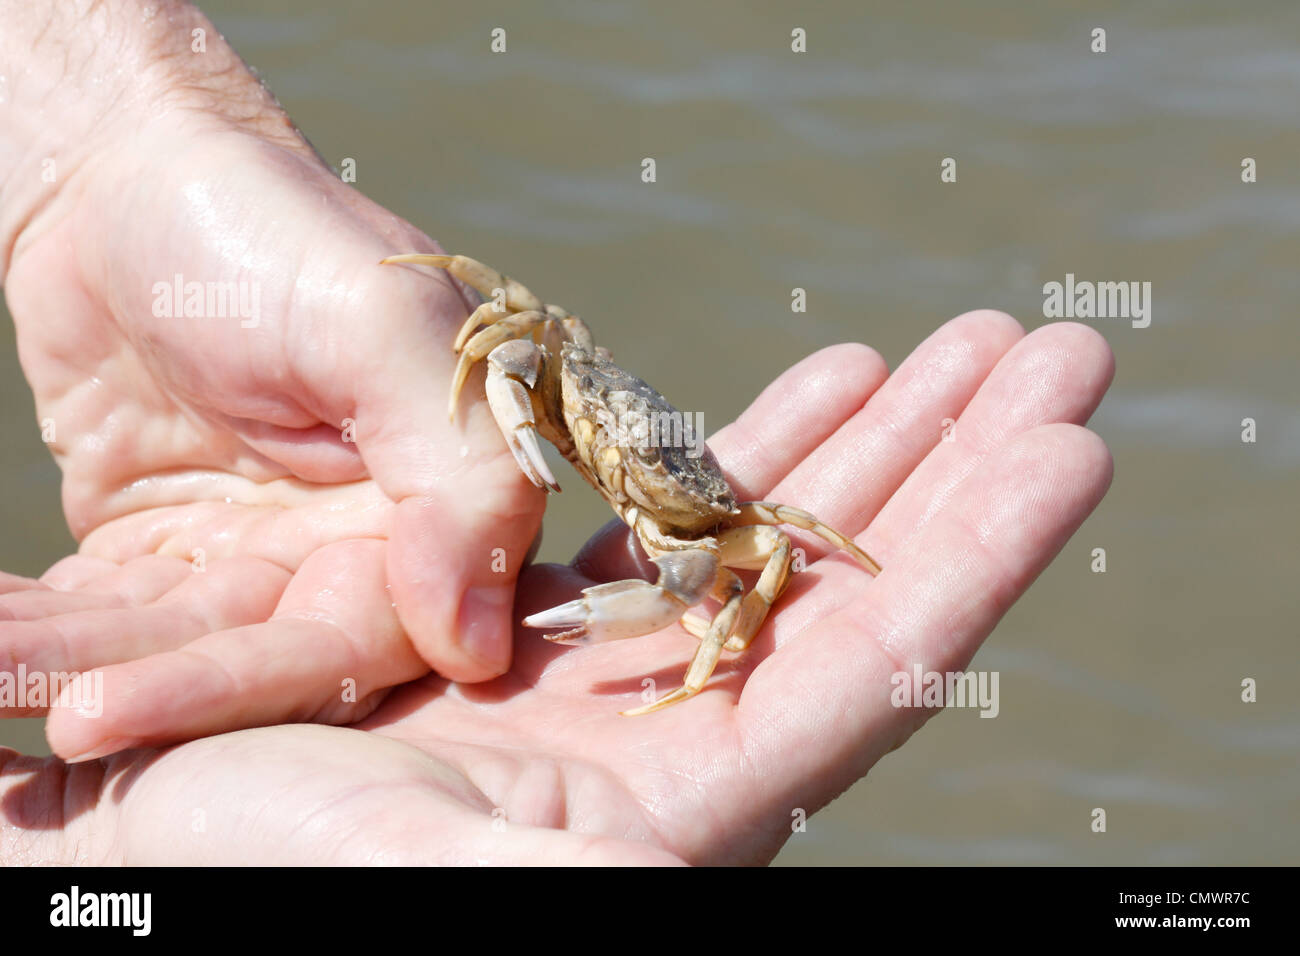 Hand holding crab Banque D'Images